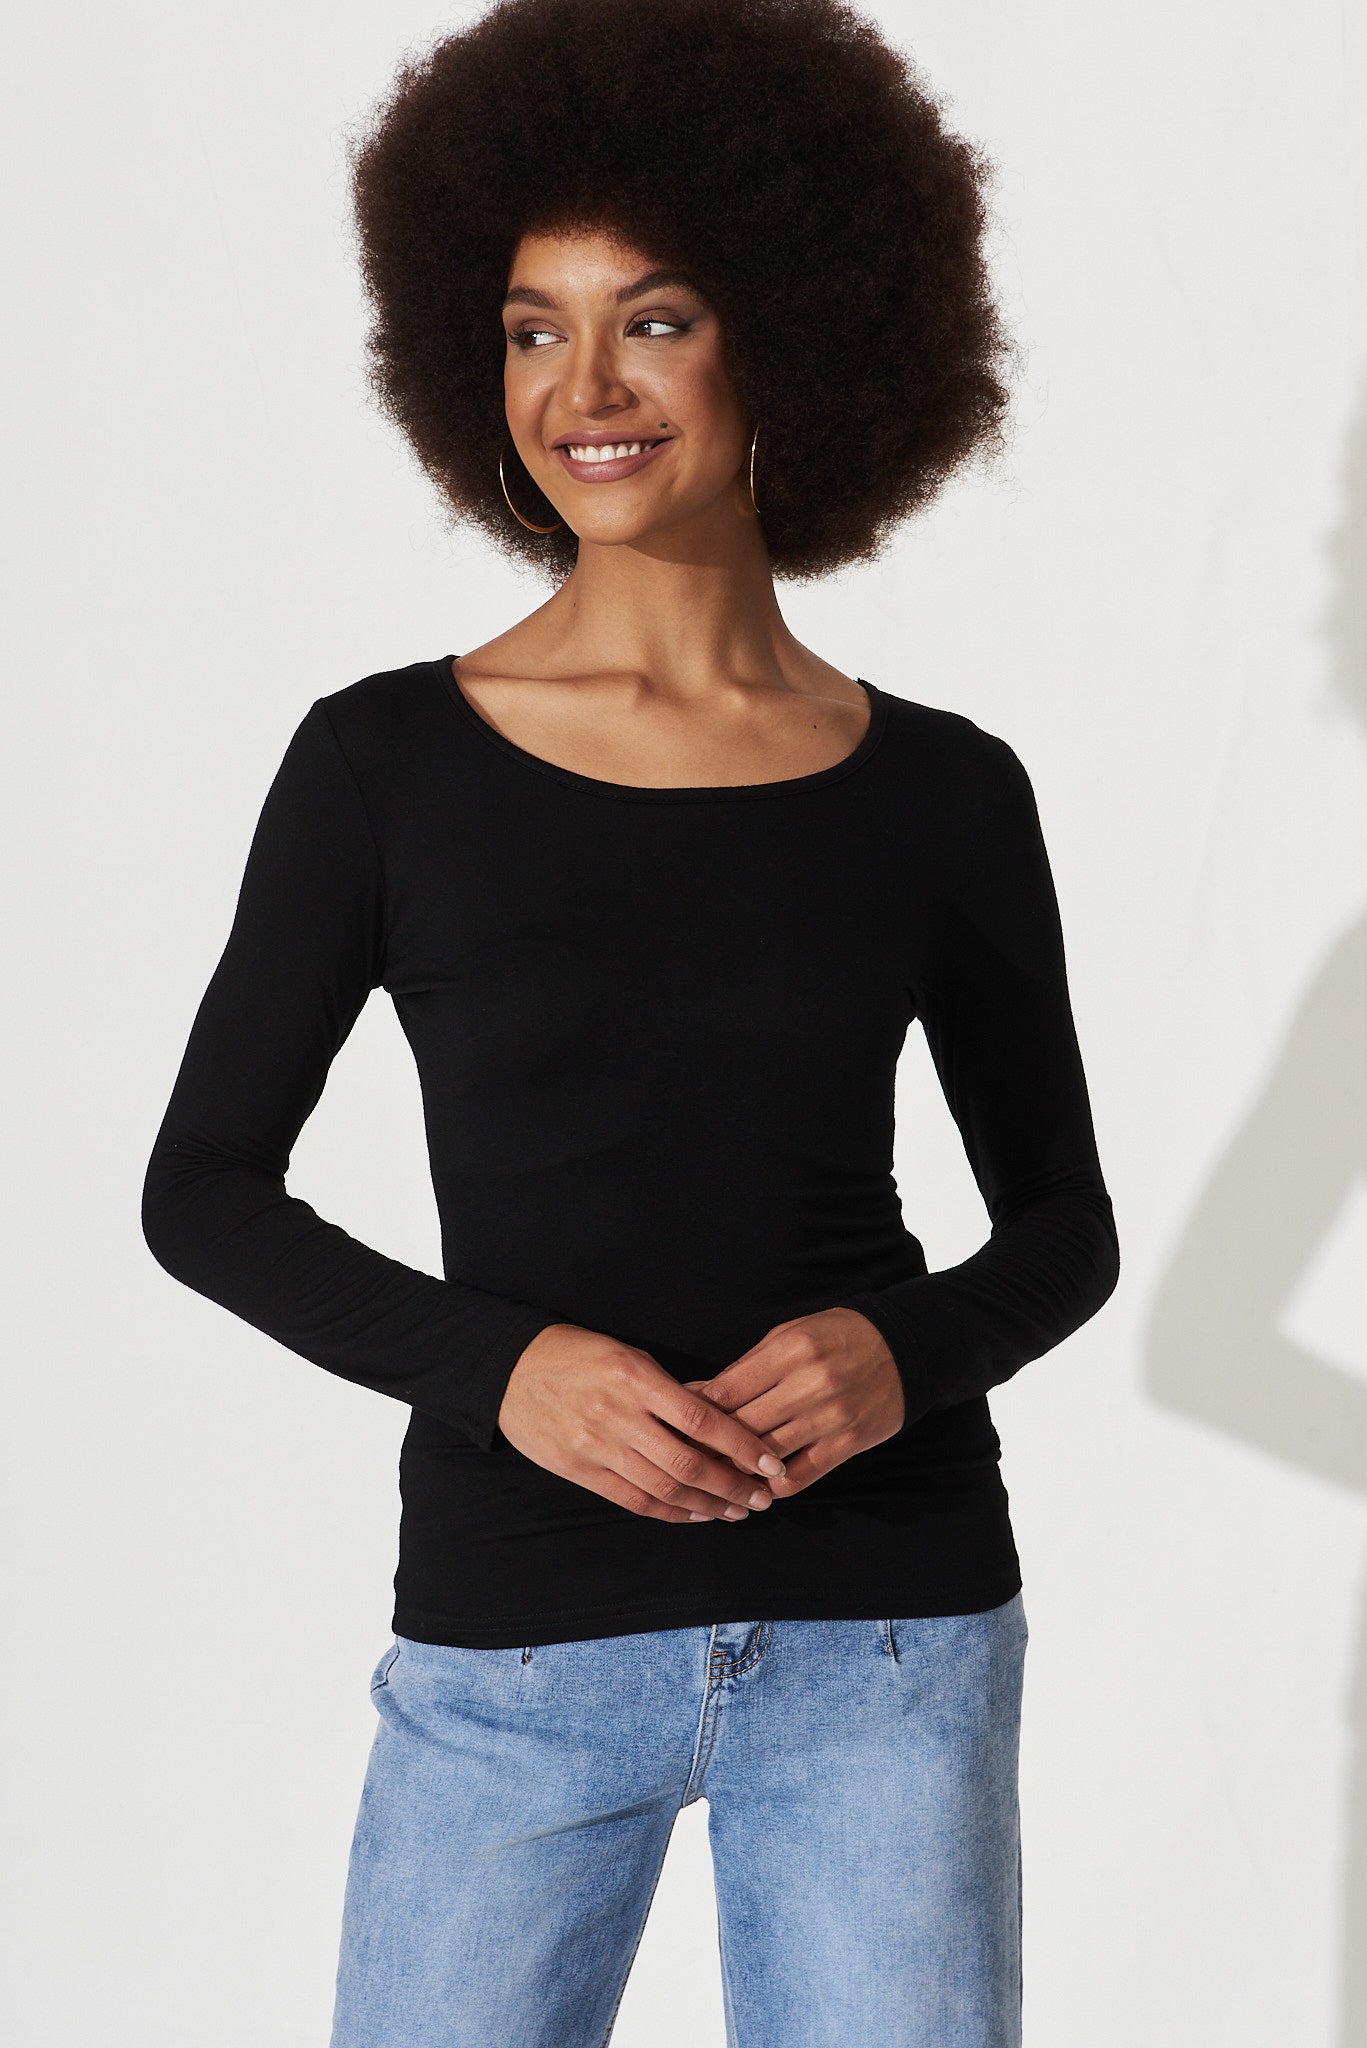 Hypnosis Top In Black - front